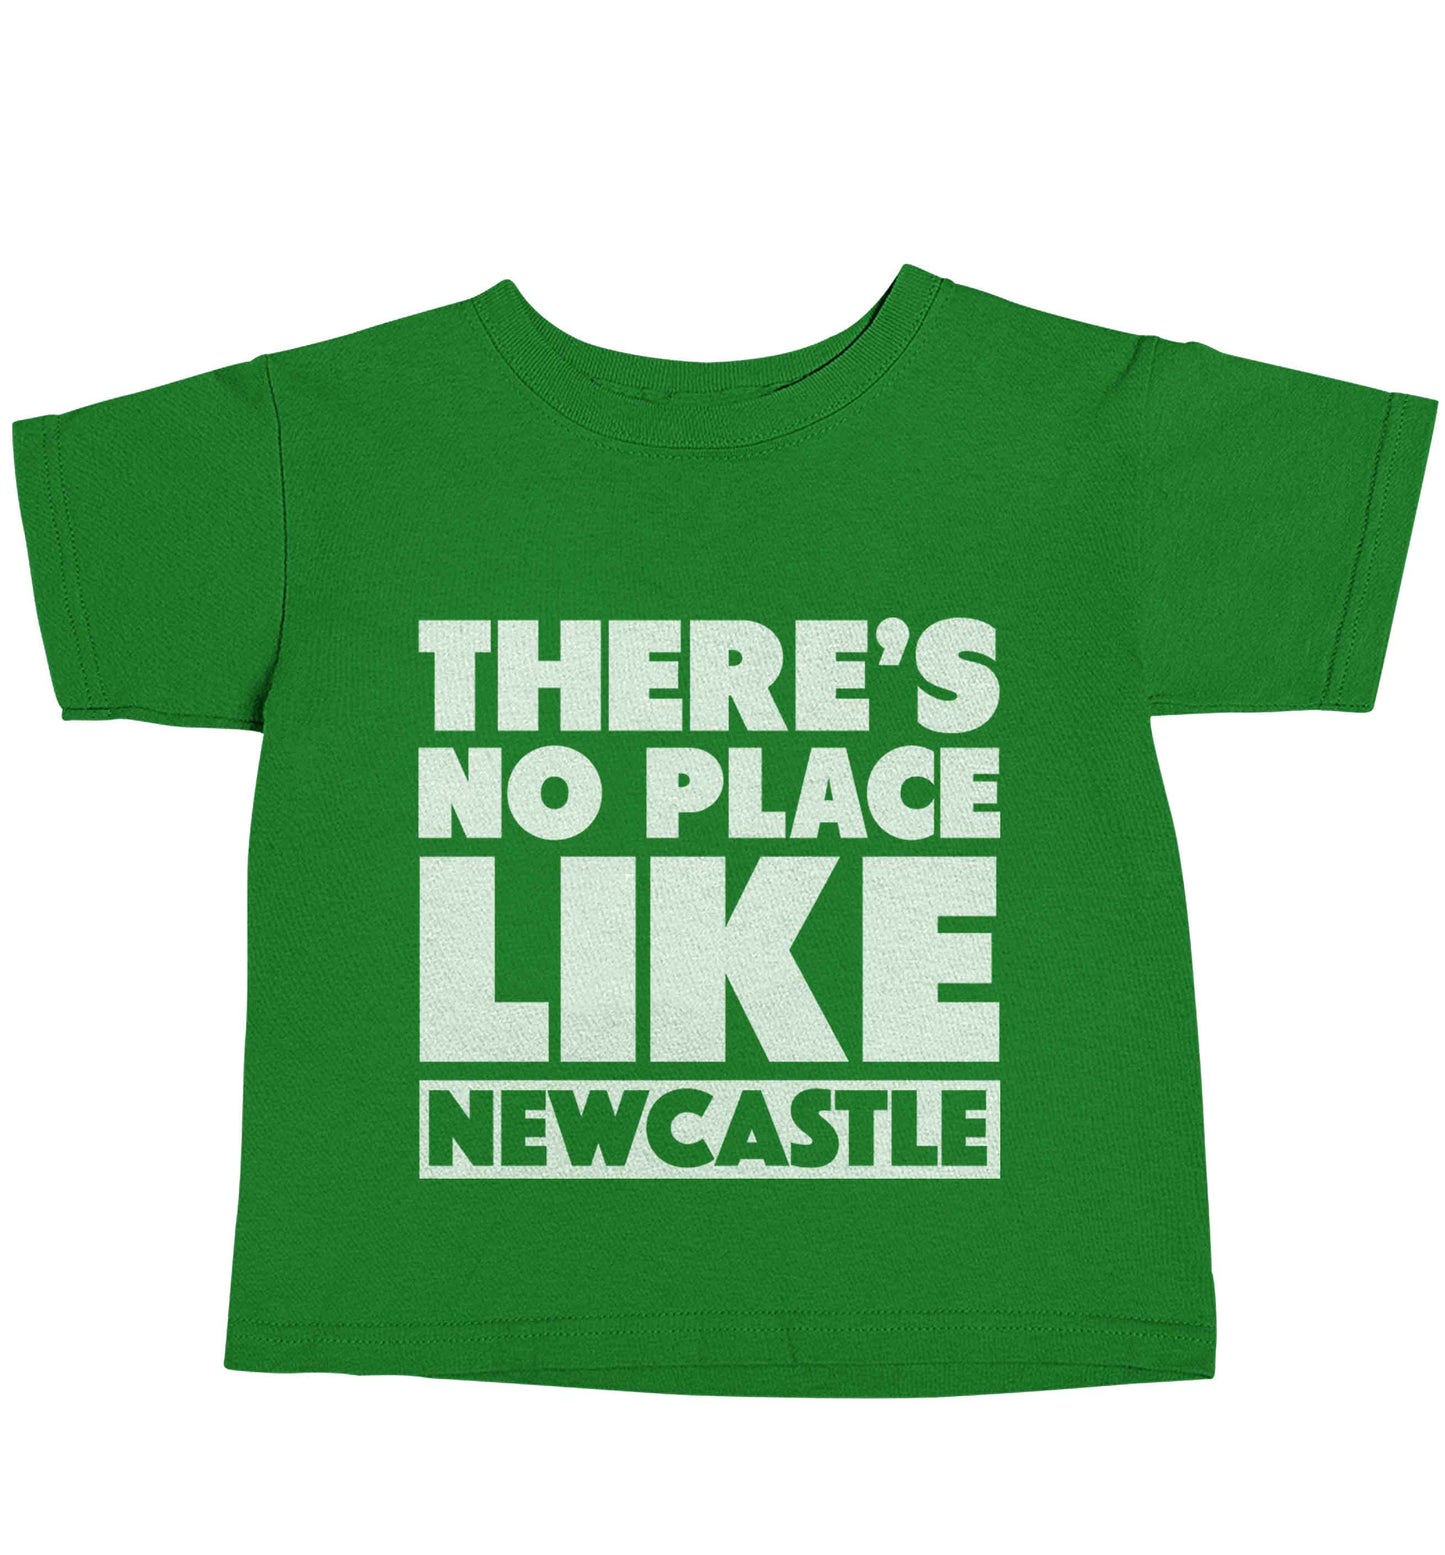 There's no place like Newcastle green baby toddler Tshirt 2 Years